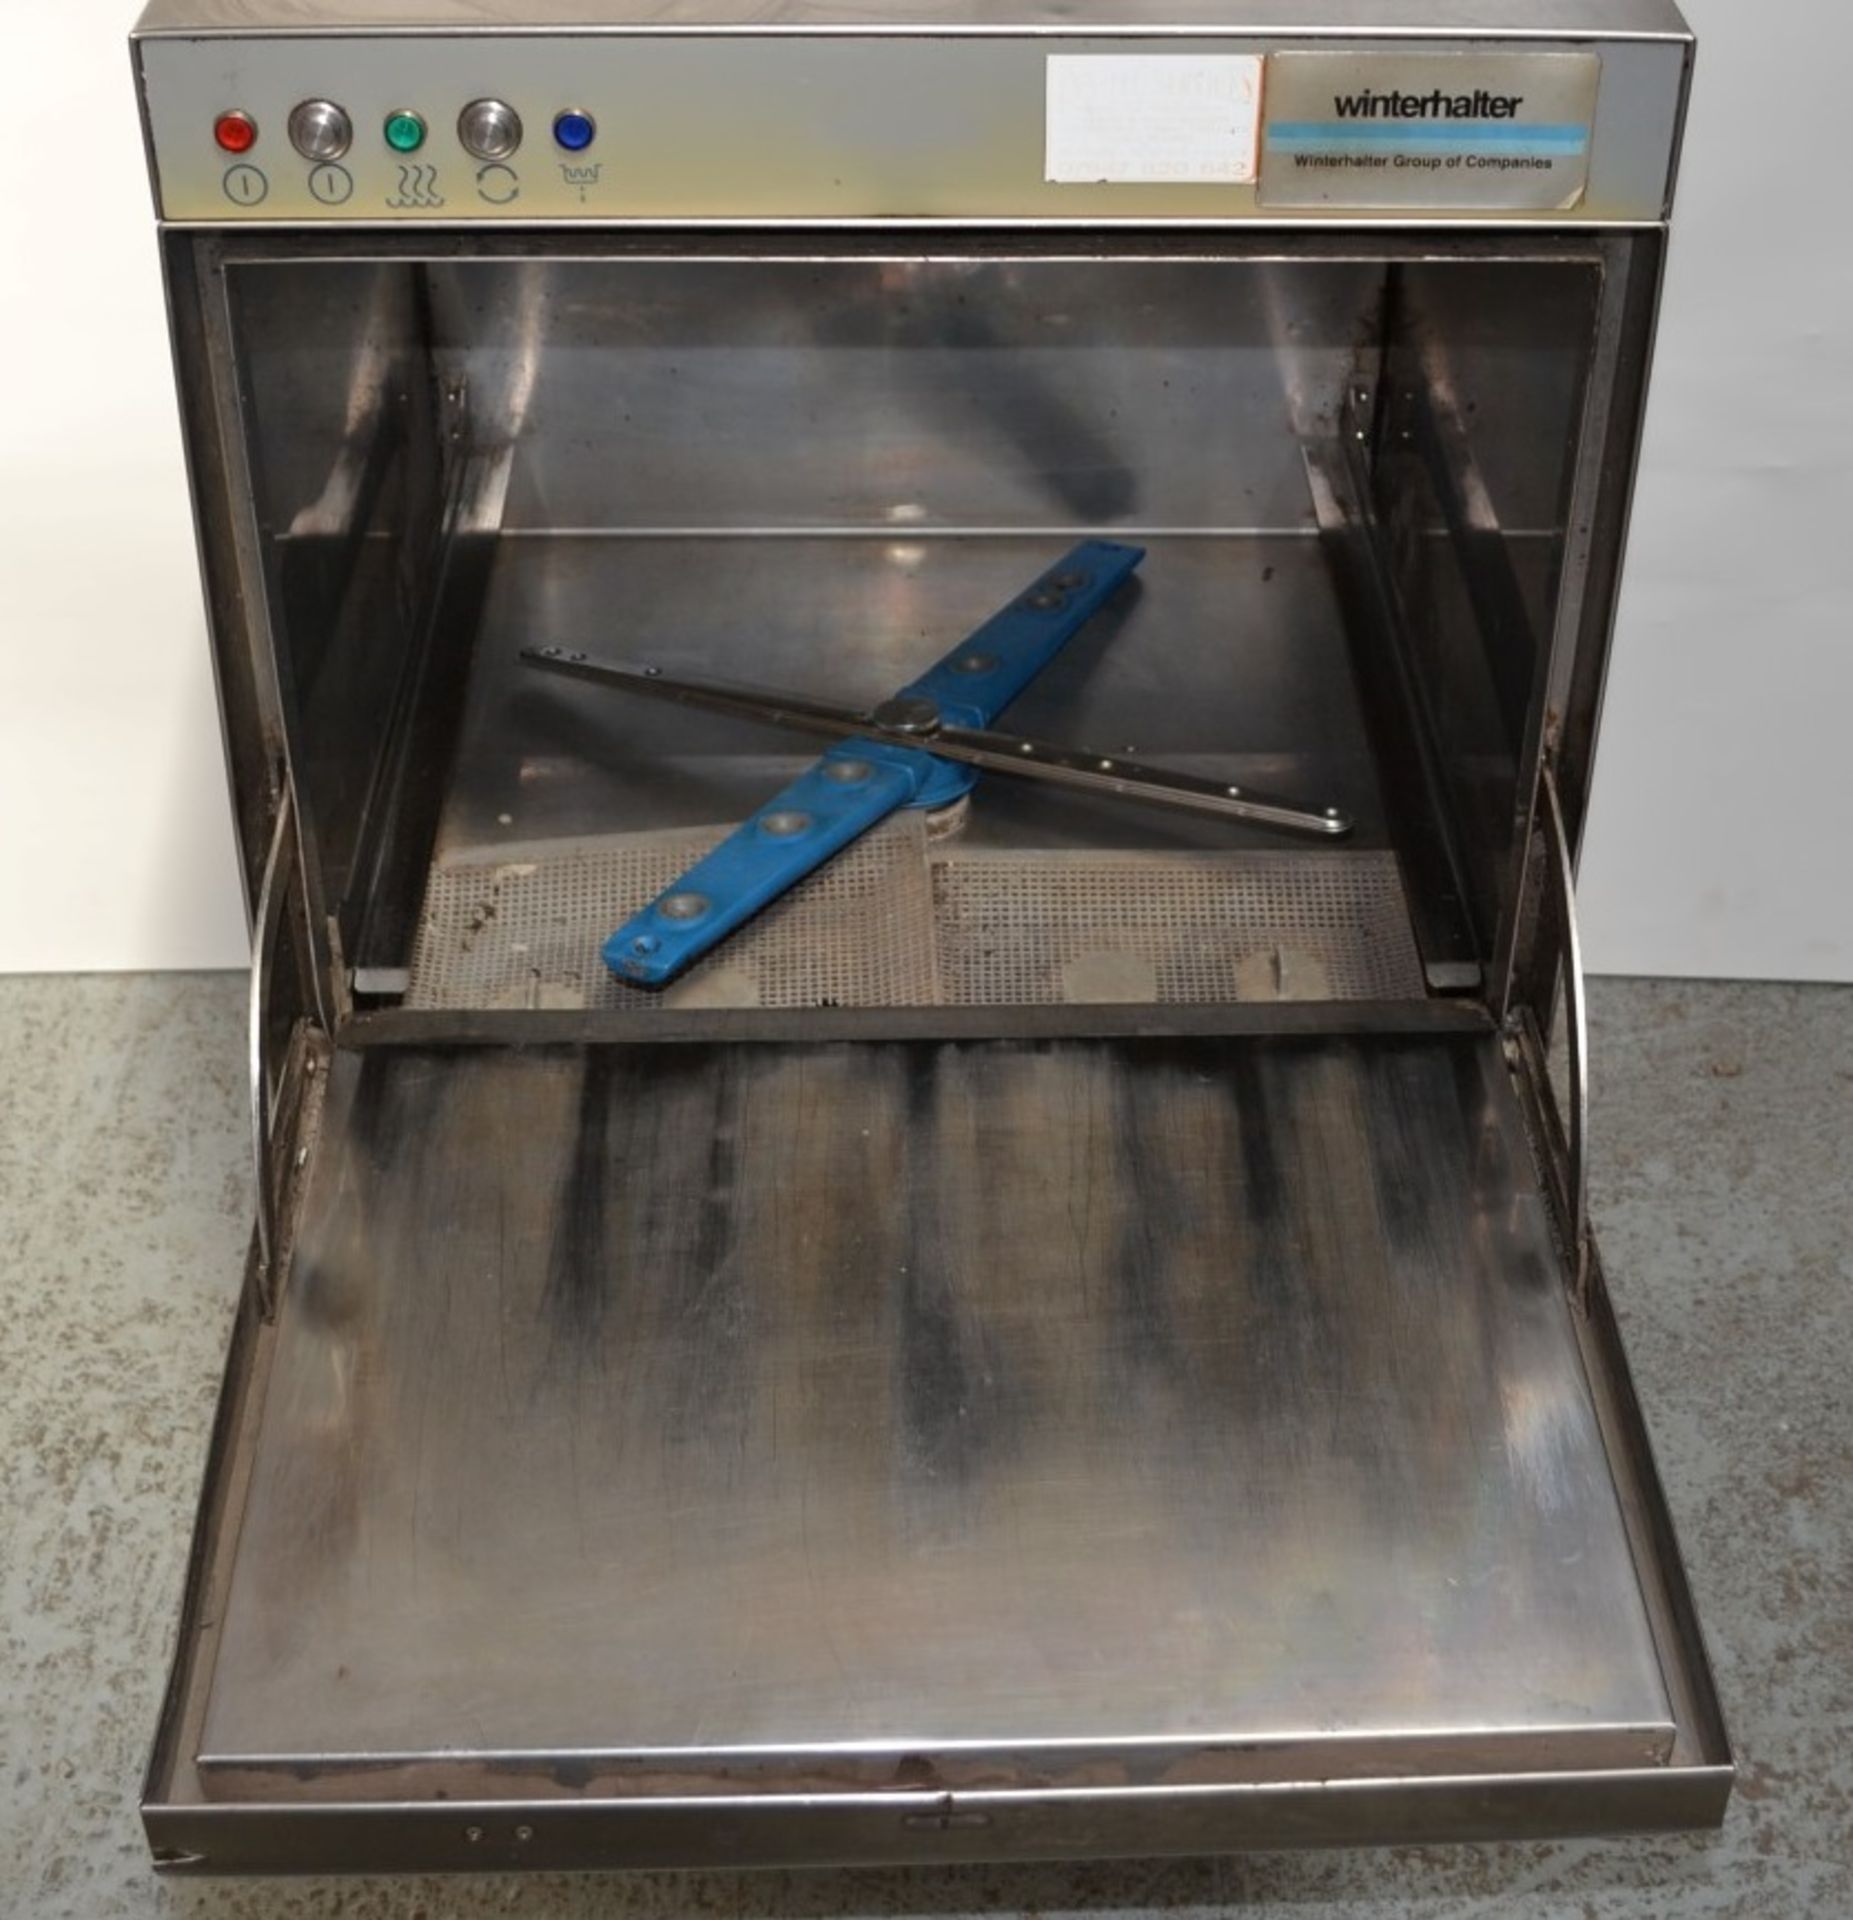 1 x Winterhalter E308-v1 Counter Height Stainless Steel Glass Washer / Dishwasher - Dimensions: D60 - Image 2 of 6